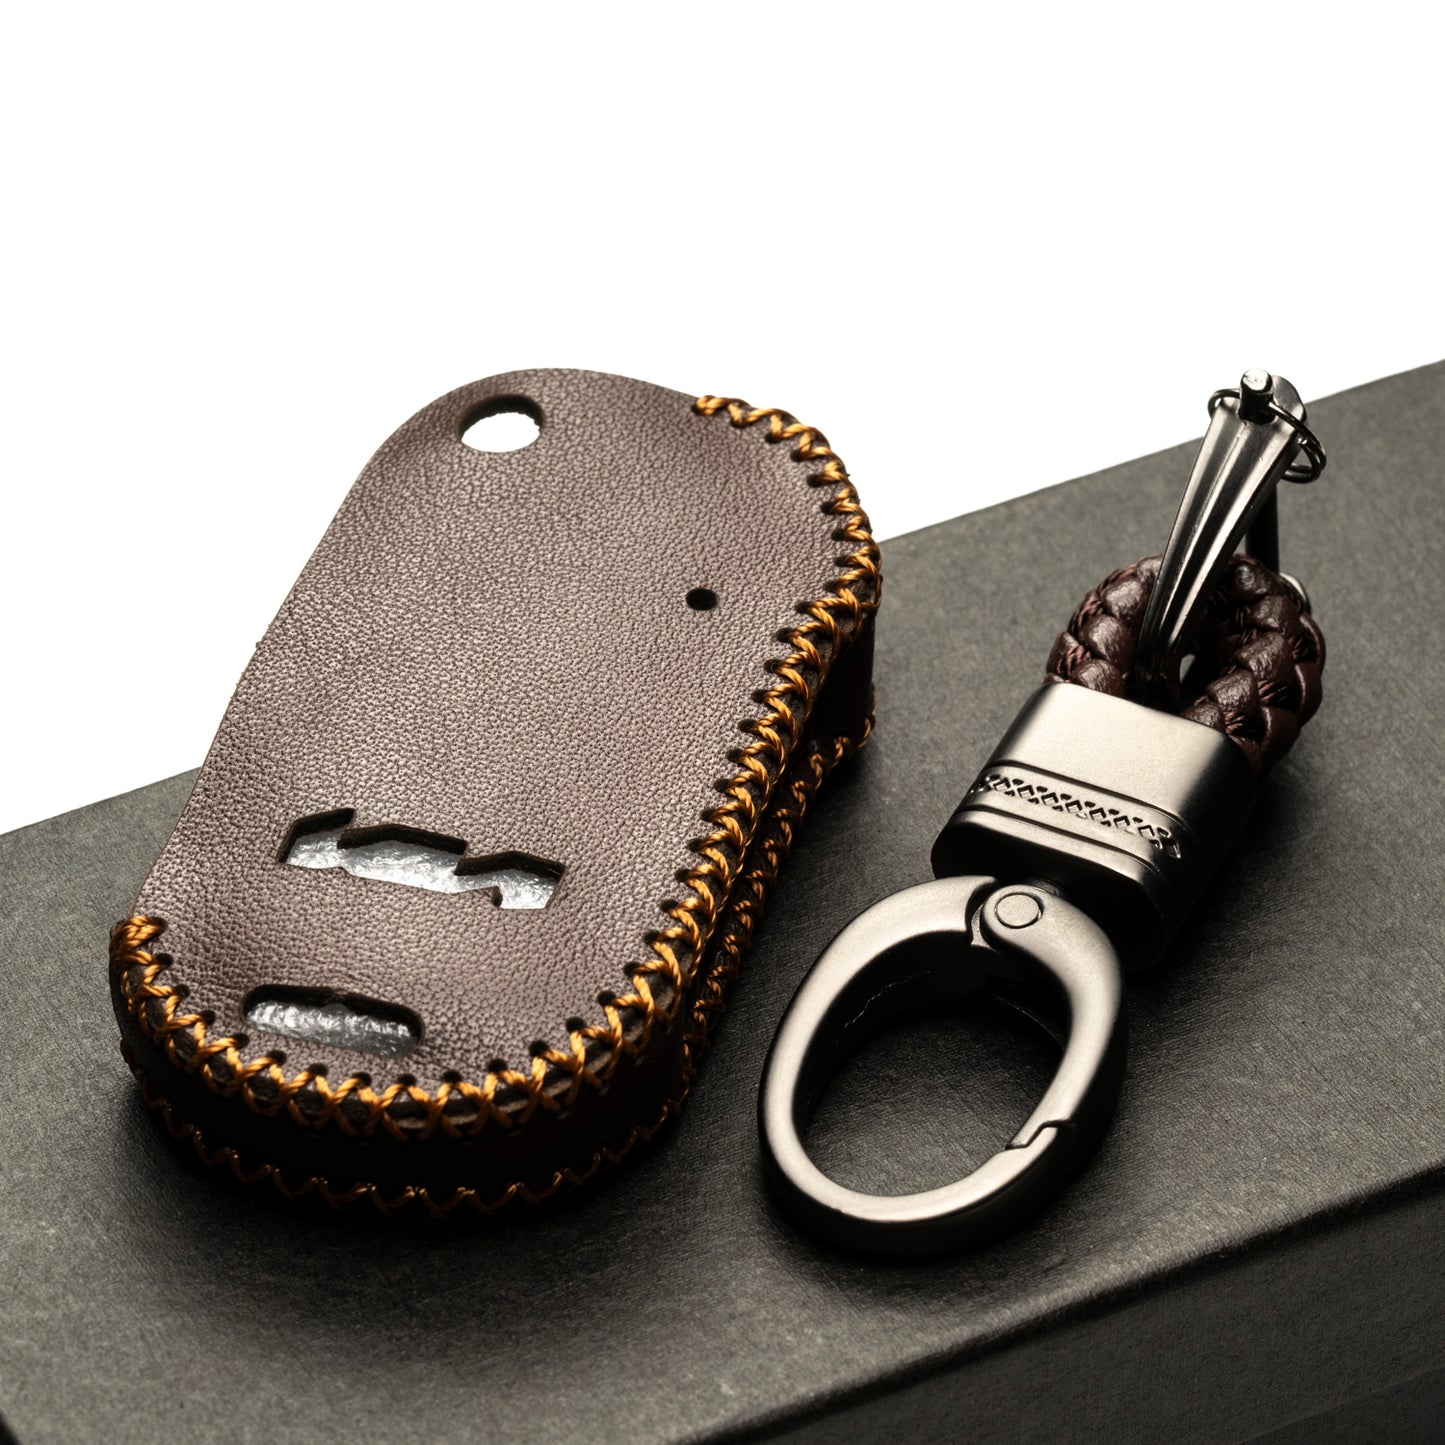 Vitodeco 4-Button Genuine Leather Flip Key Fob Case Cover Compatible with KIA New Emblem 2021-2024